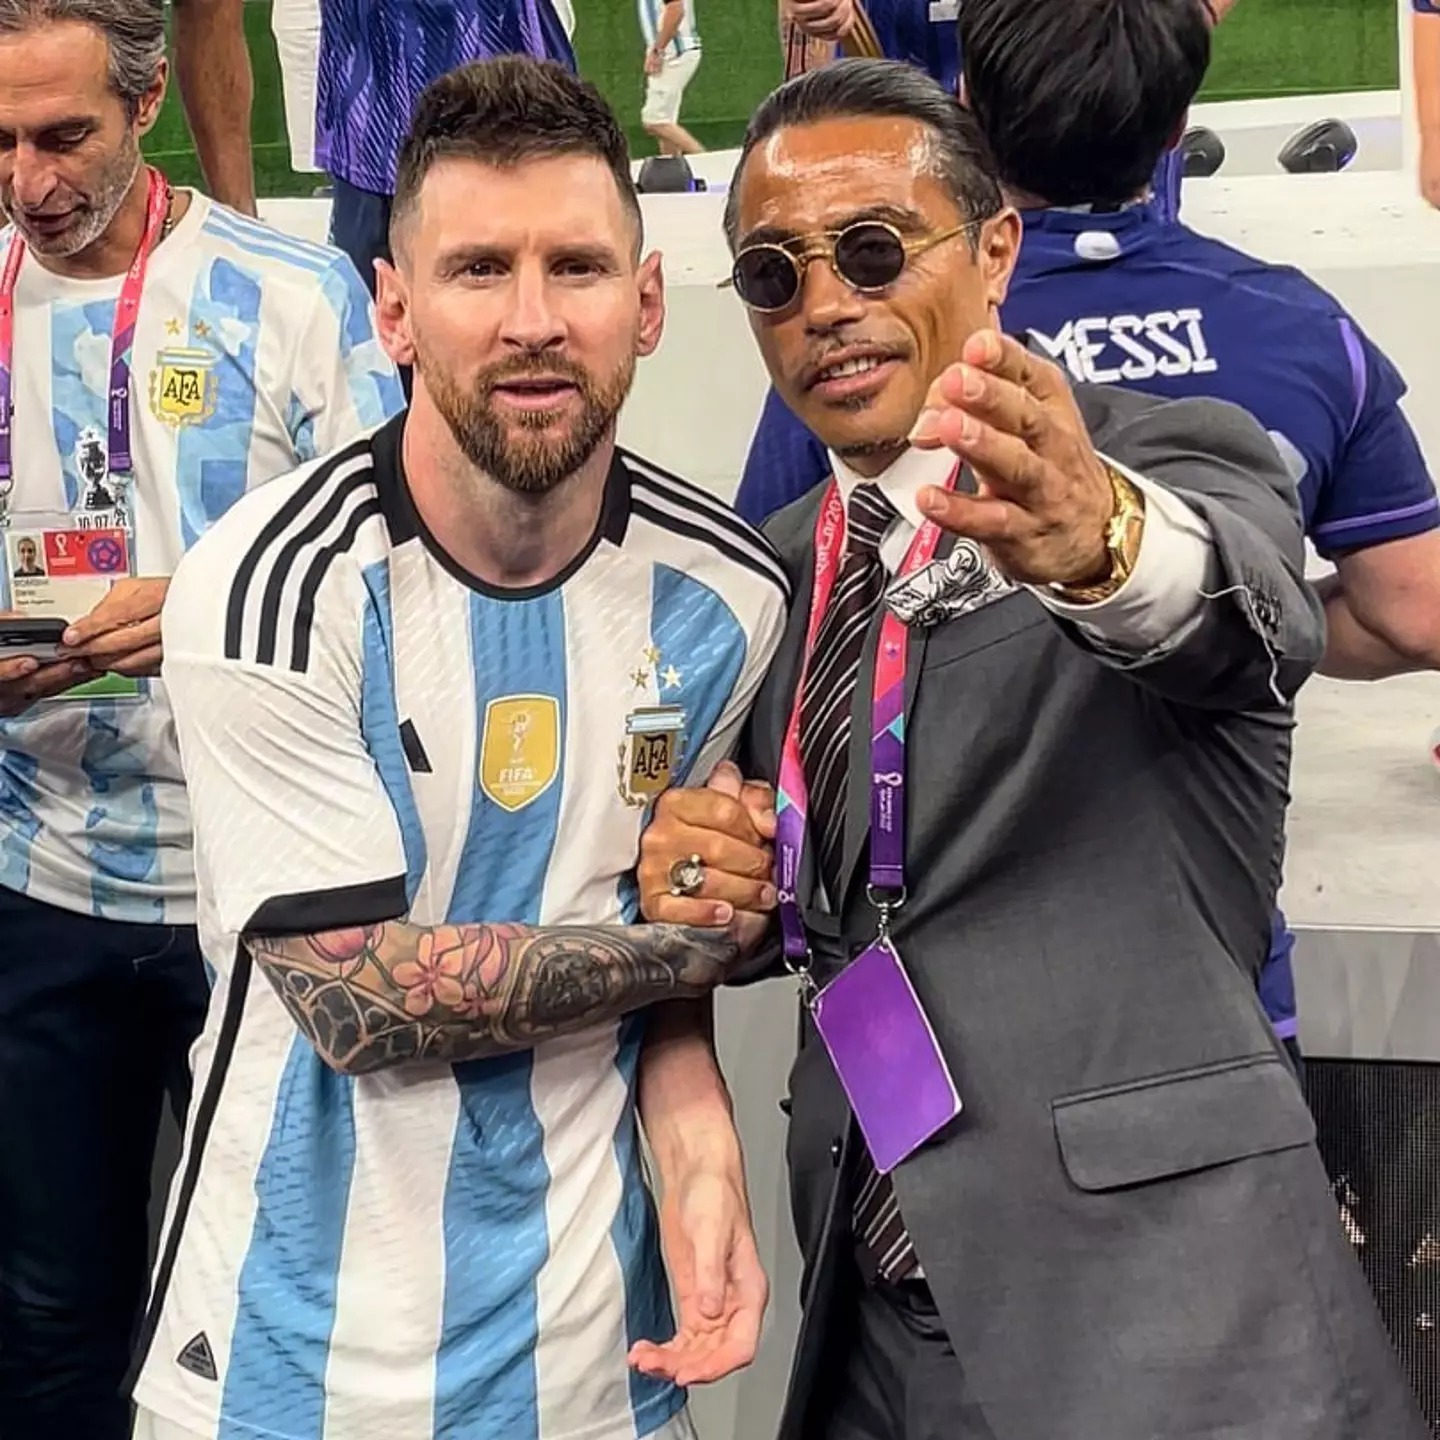 Salt Bae shared a selfie with Lionel Messi.